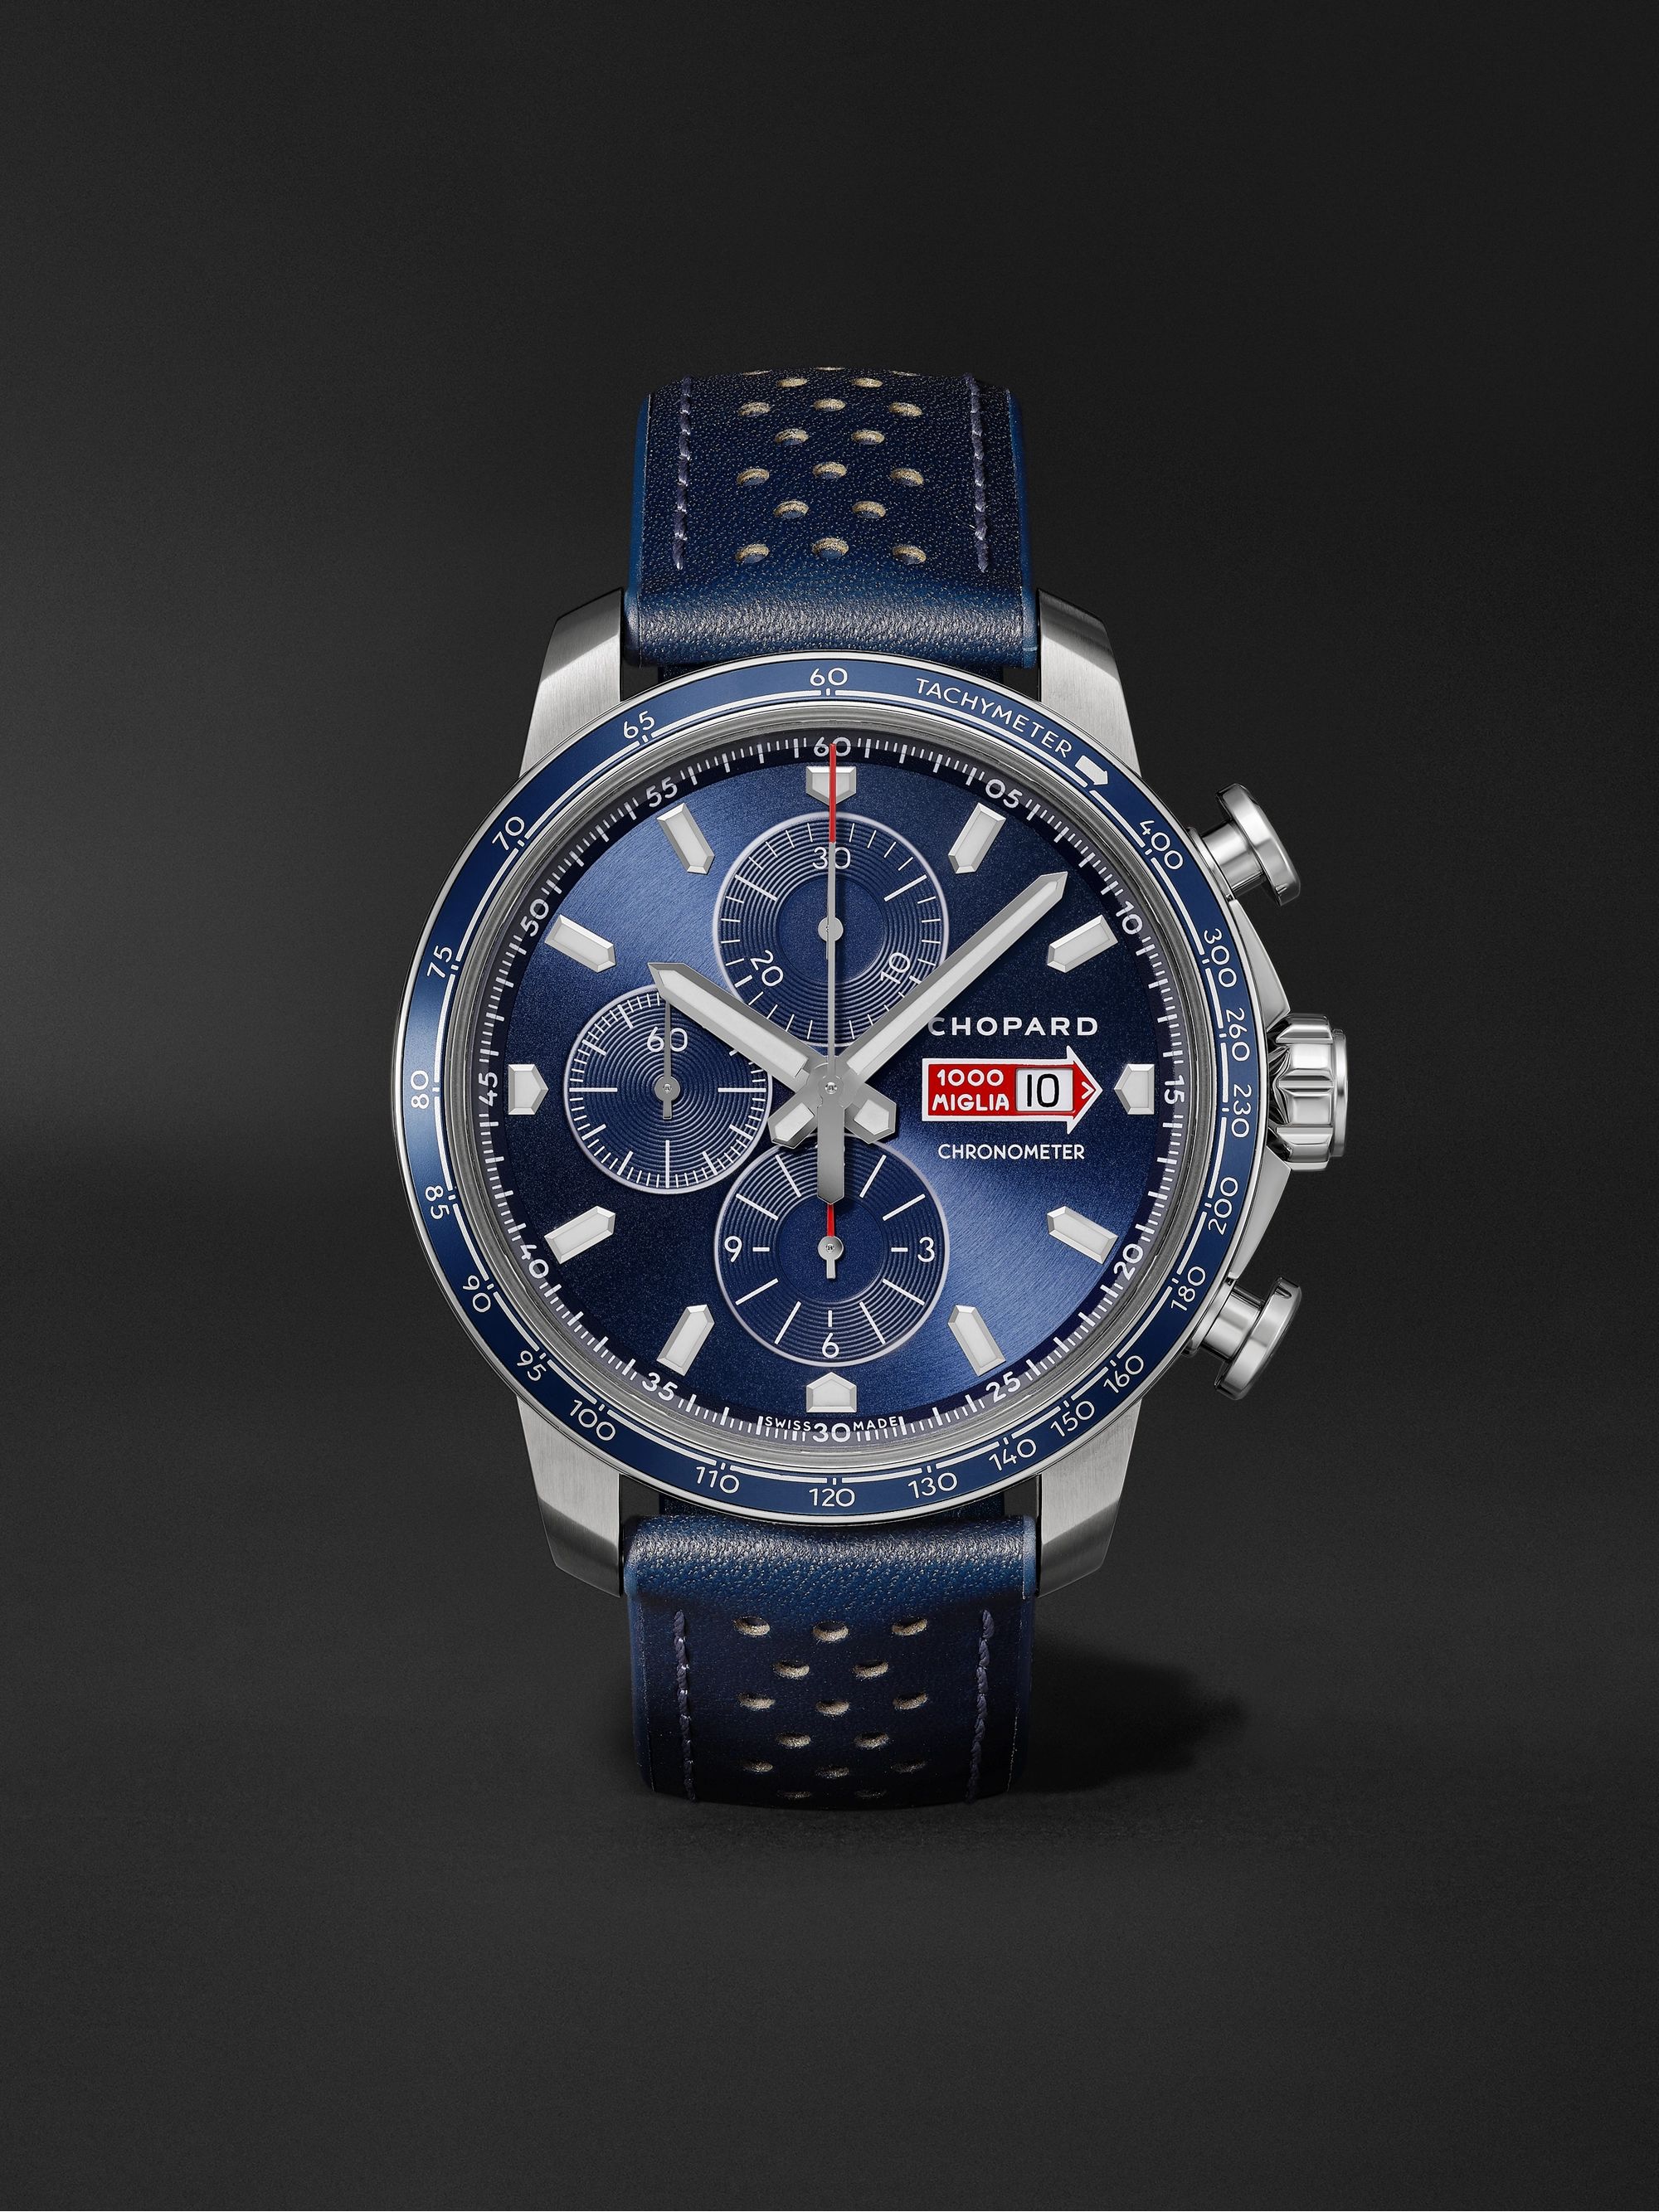 CHOPARD Mille Miglia GTS Azzurro Chrono Automatic Limited Edition 44mm Stainless Steel and Leather Watch, Ref. No. 168571-3007